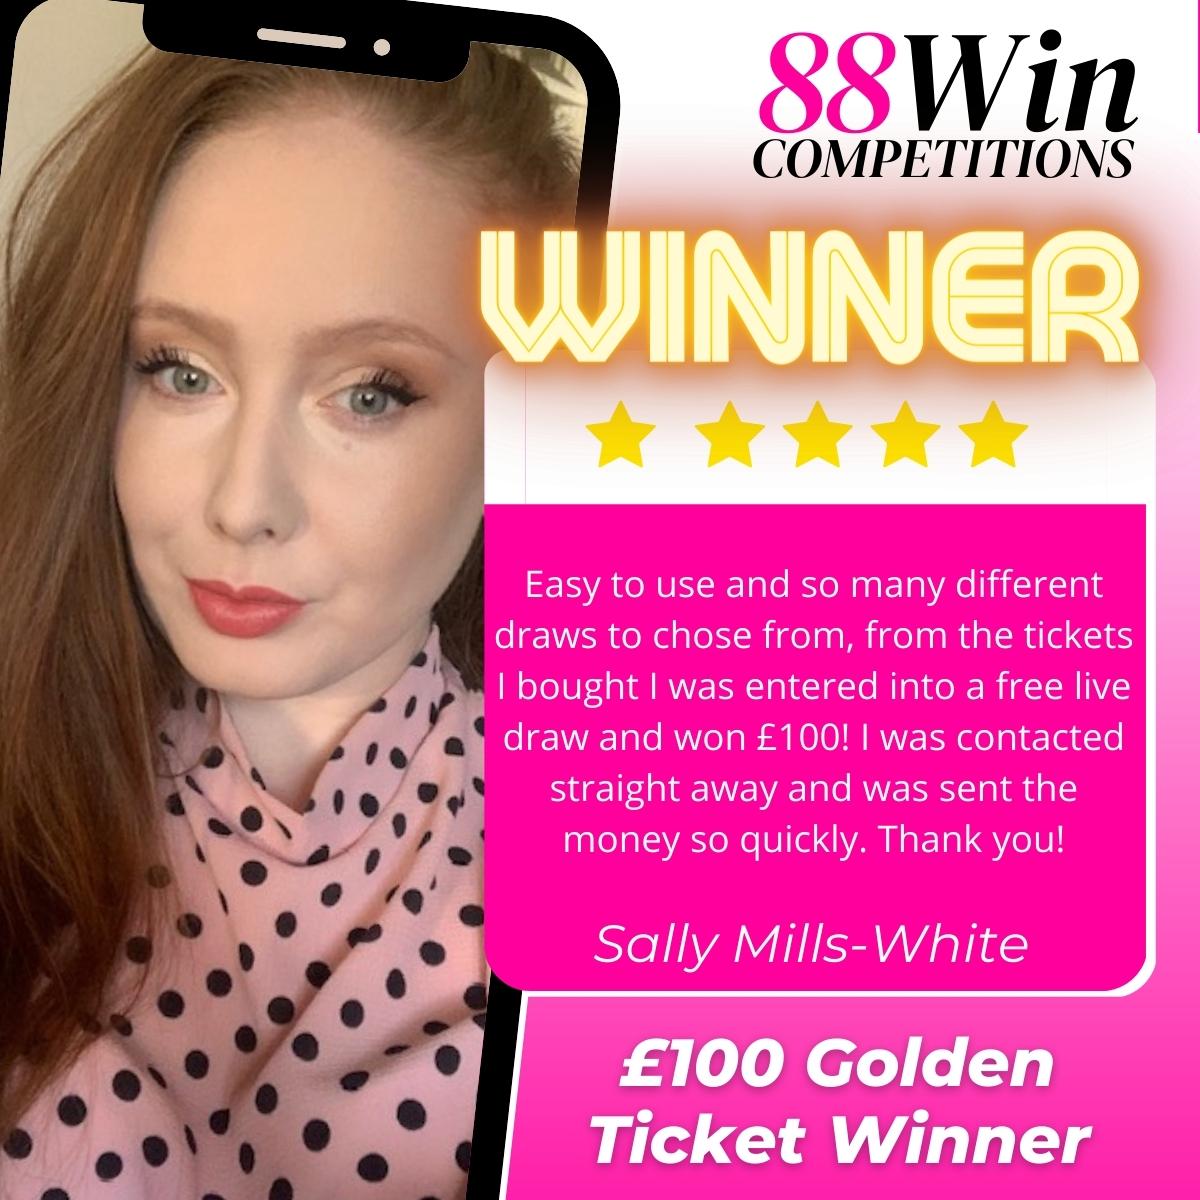 88Win Competitions £100 Golden Ticket Winner Photo